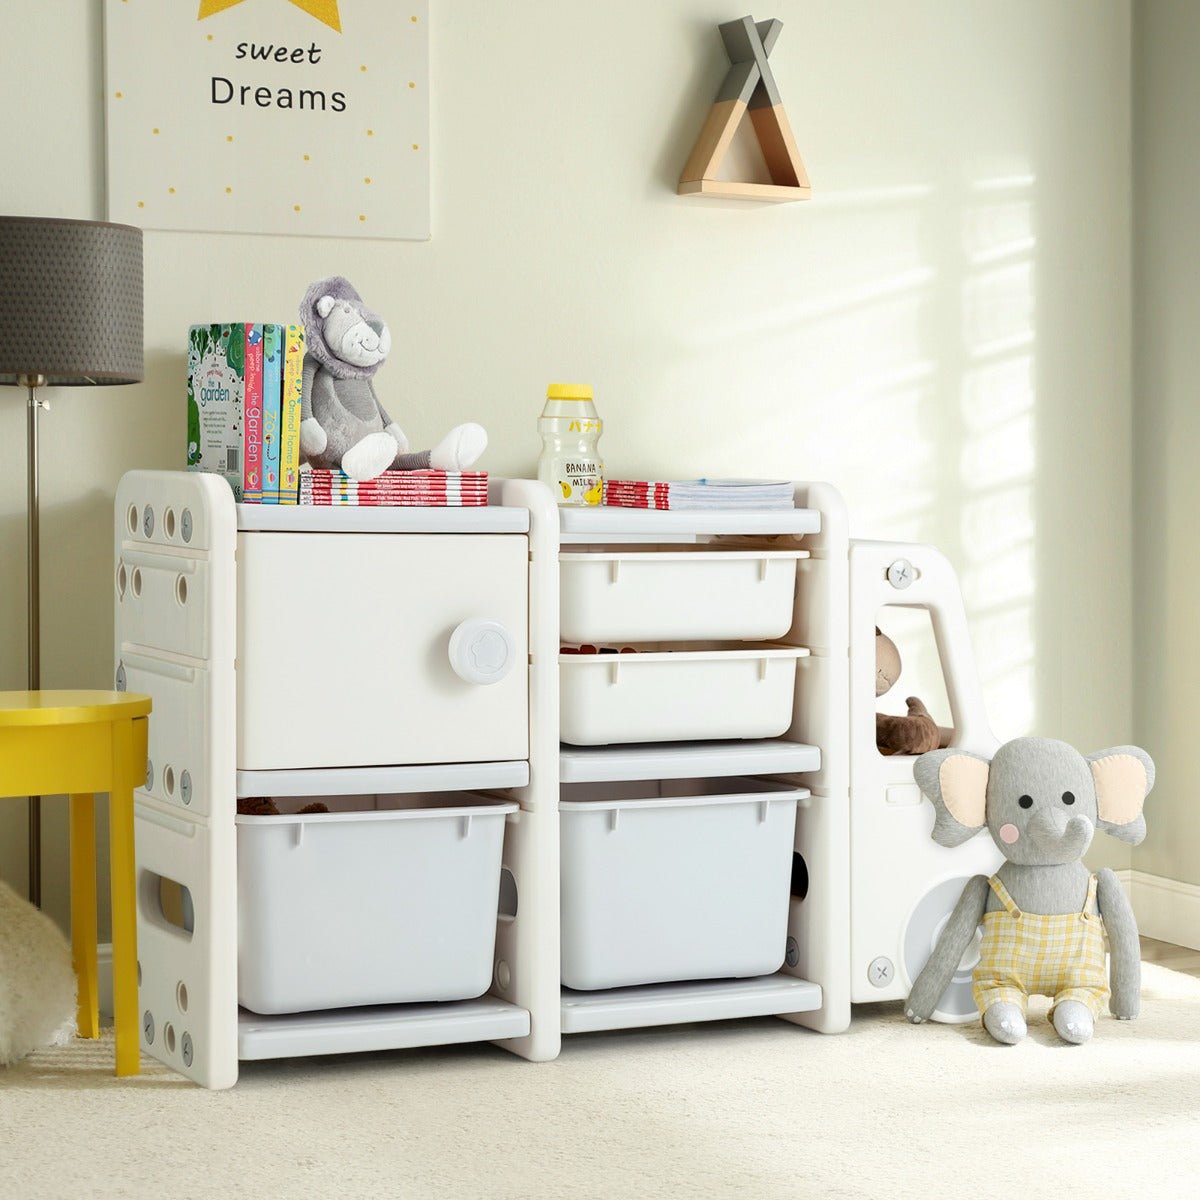 Buy the Ultimate Grey Truck Shaped Kids Storage Cabinet for Organized Play